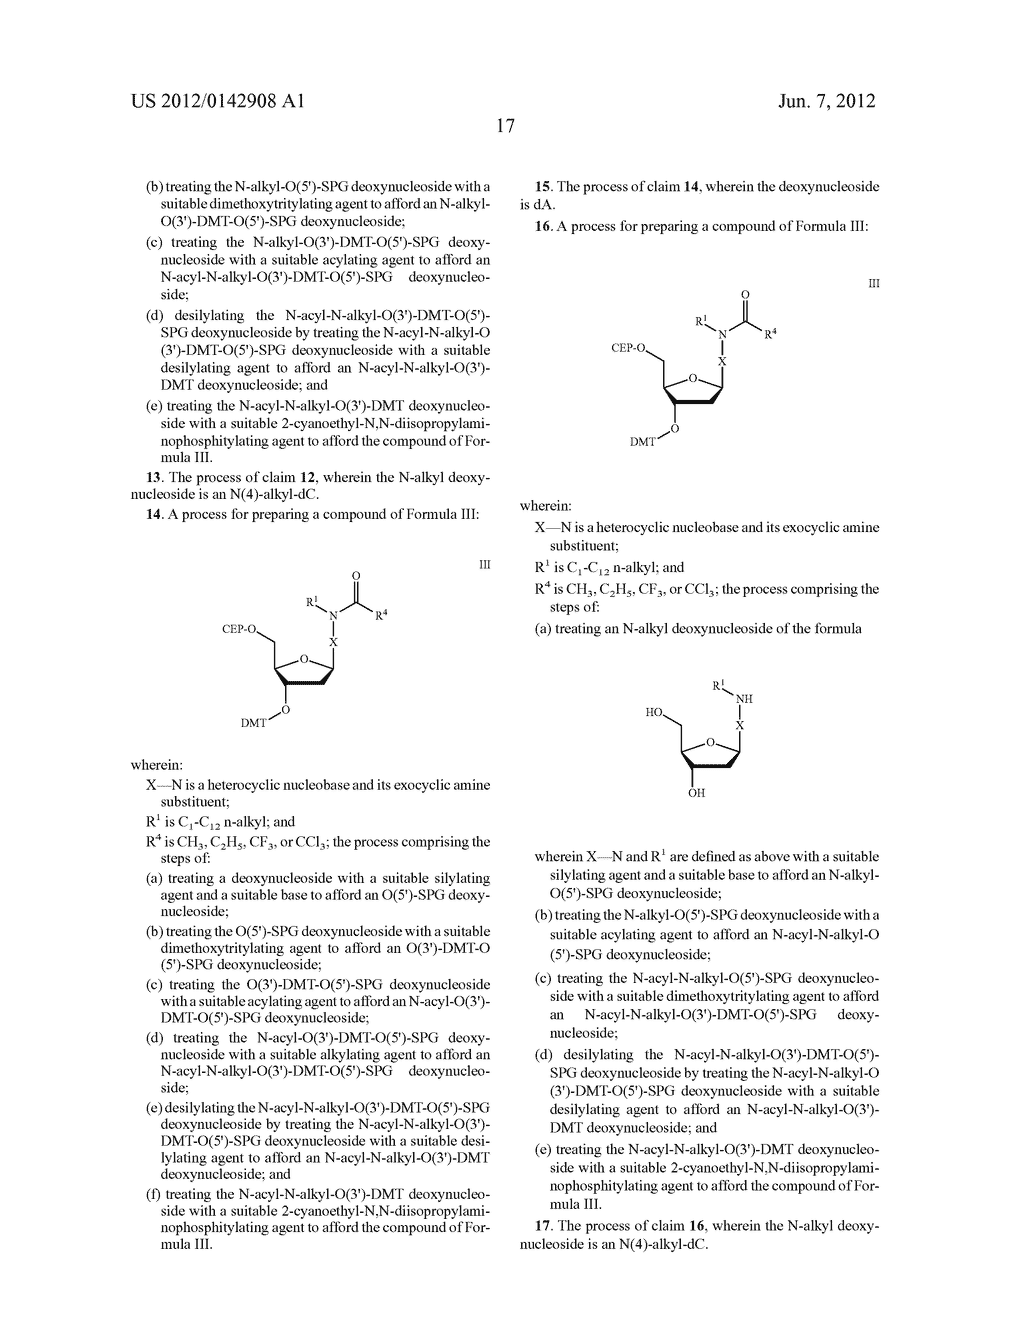 COMPOUNDS FOR THE SYNTHETIC INTRODUCTION OF N-ALKYL NUCLEOSIDES INTO DNA     OLIGONUCLEOTIDES - diagram, schematic, and image 18